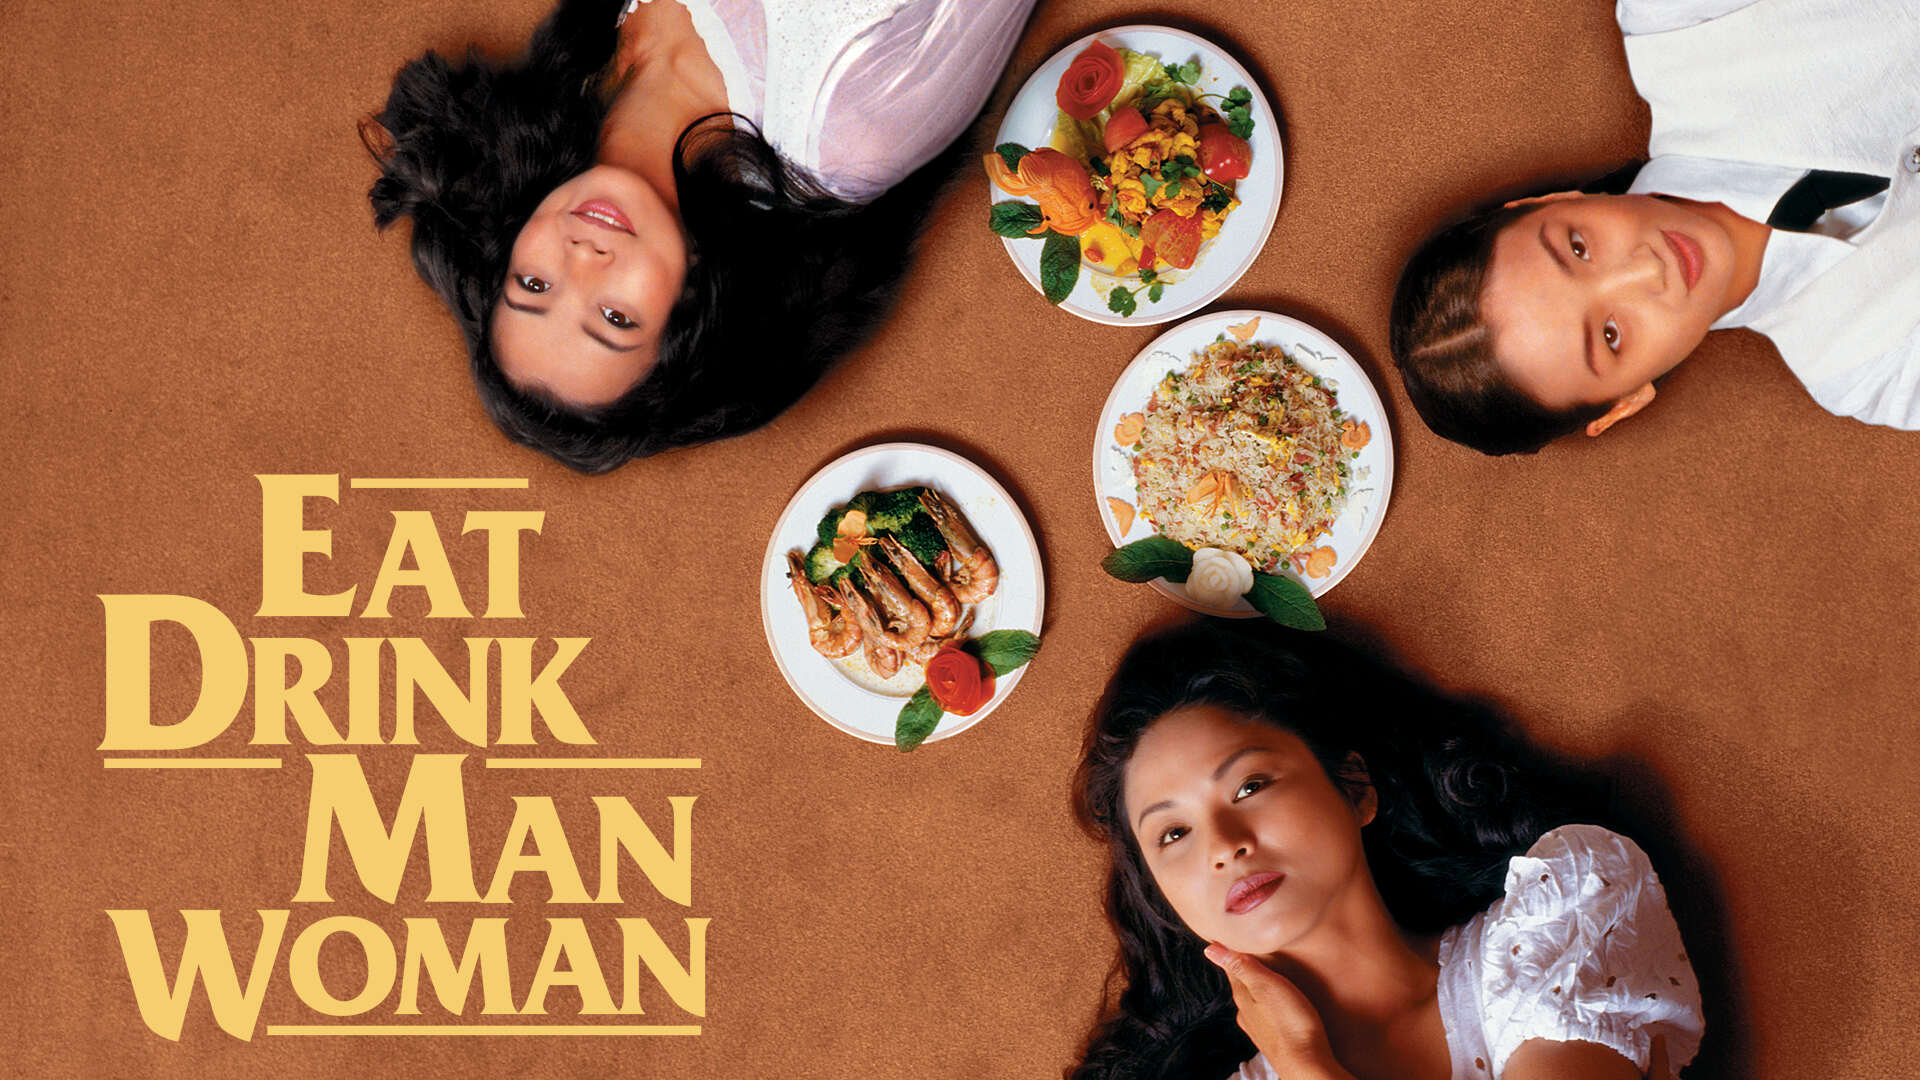 38-facts-about-the-movie-eat-drink-man-woman